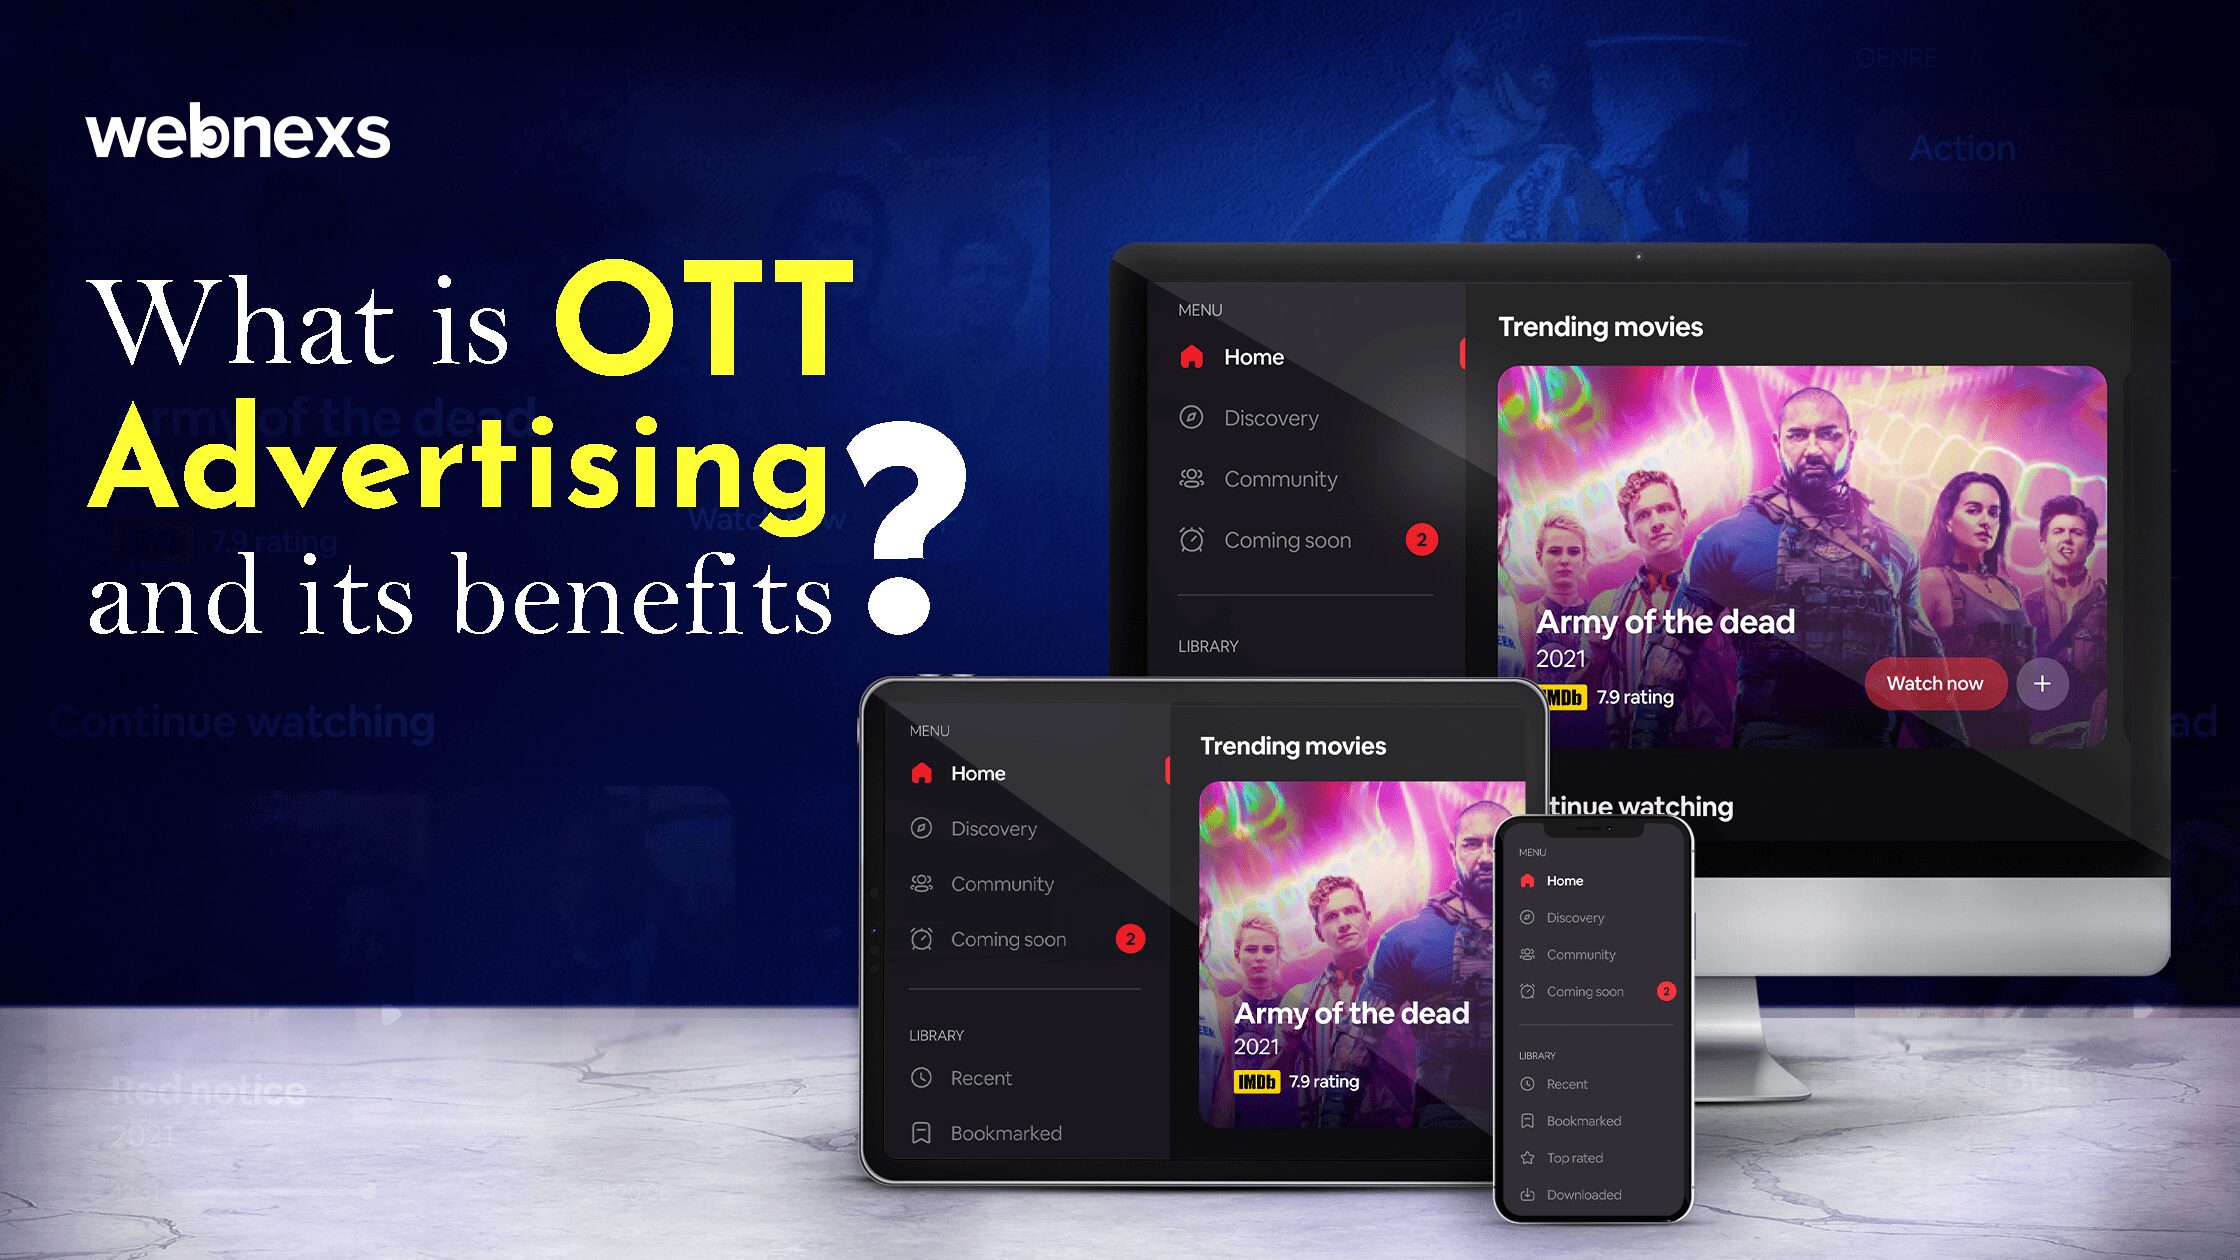 What is OTT Advertising? And its benefits?